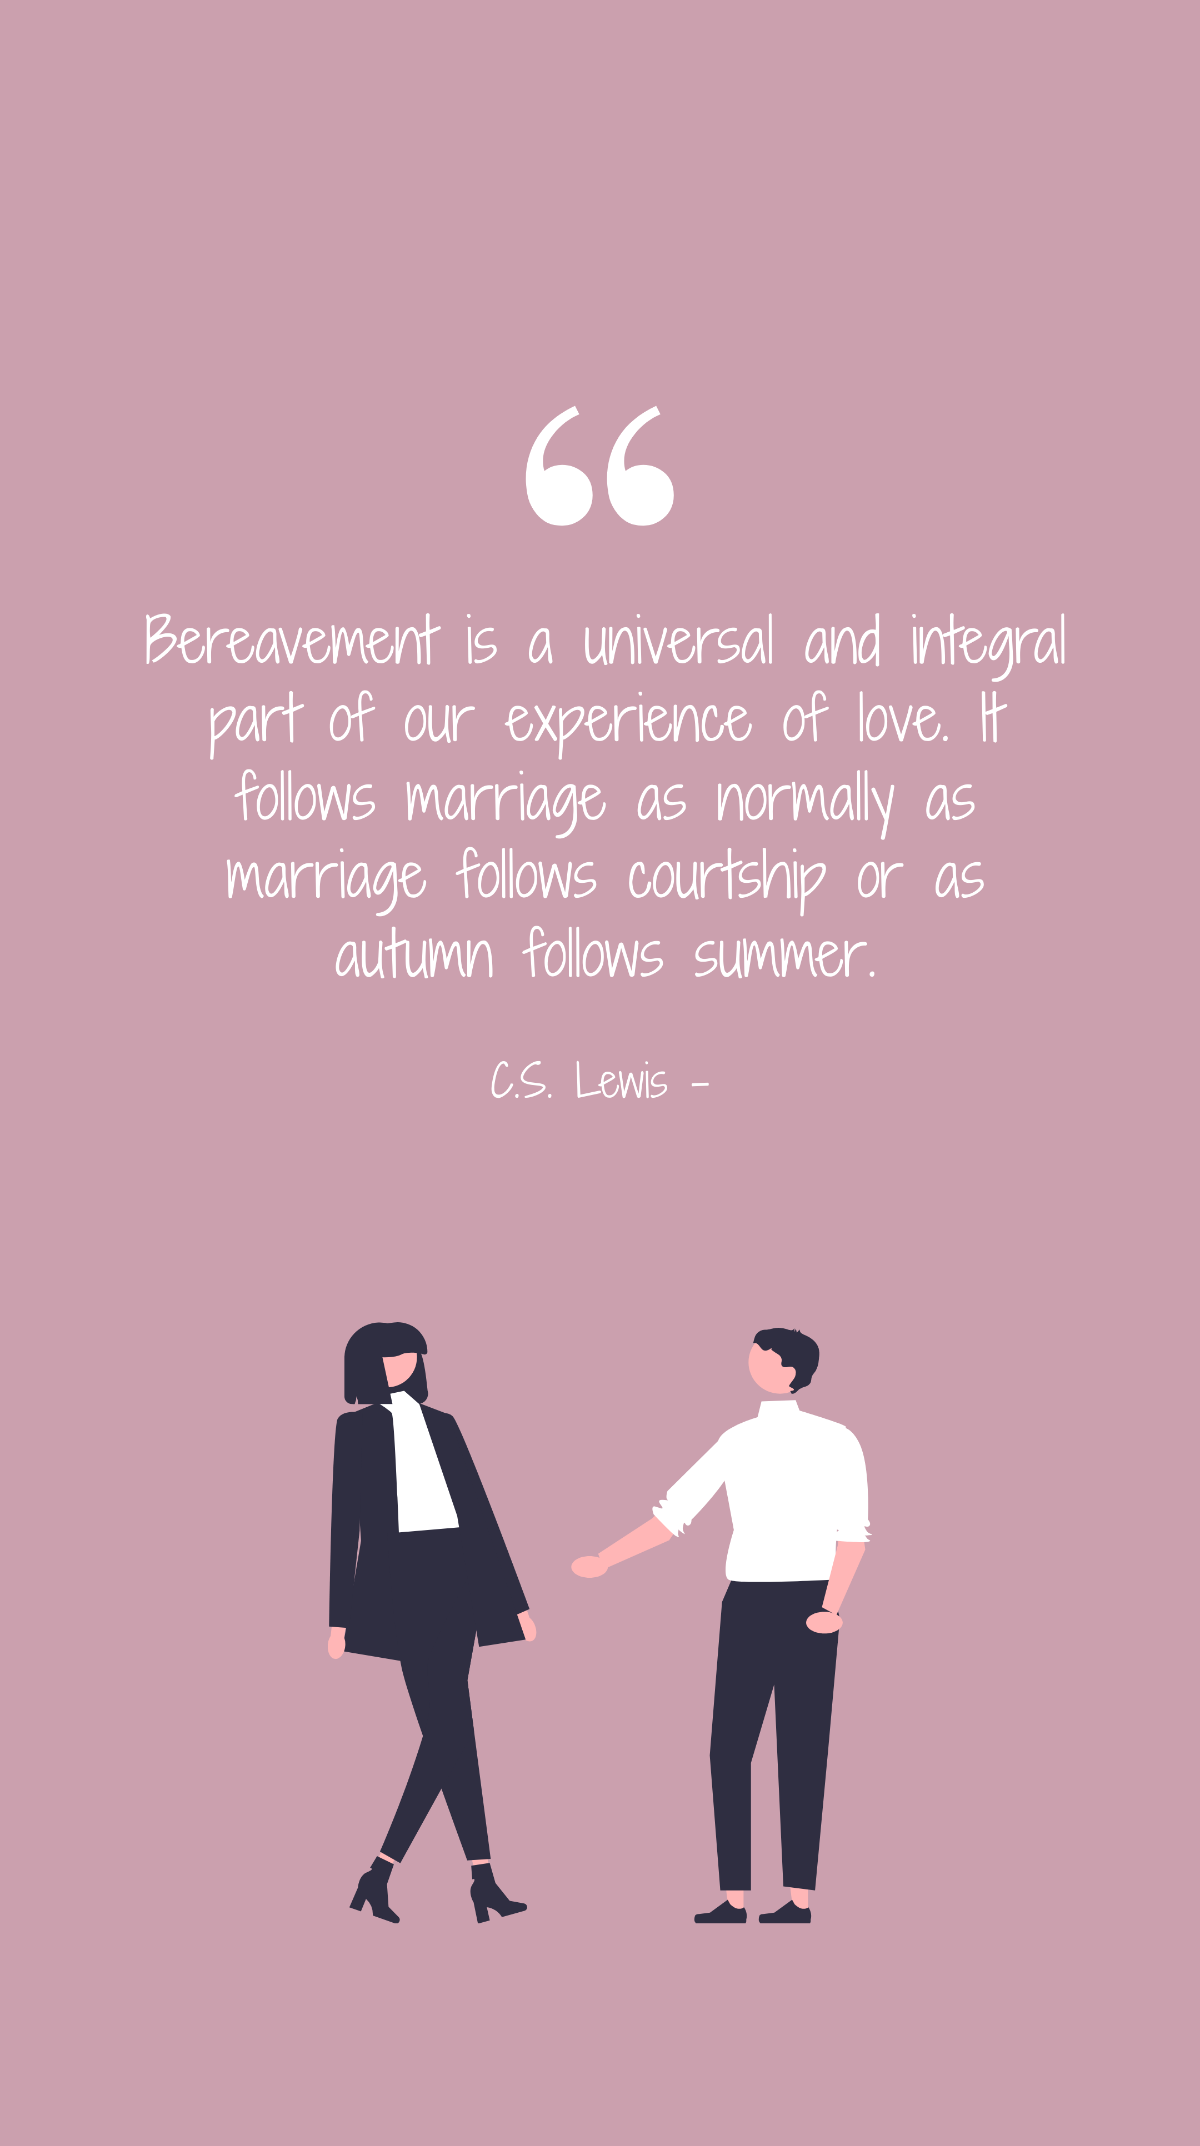 C.S. Lewis - Bereavement is a universal and integral part of our experience of love. It follows marriage as normally as marriage follows courtship or as autumn follows summer. Template